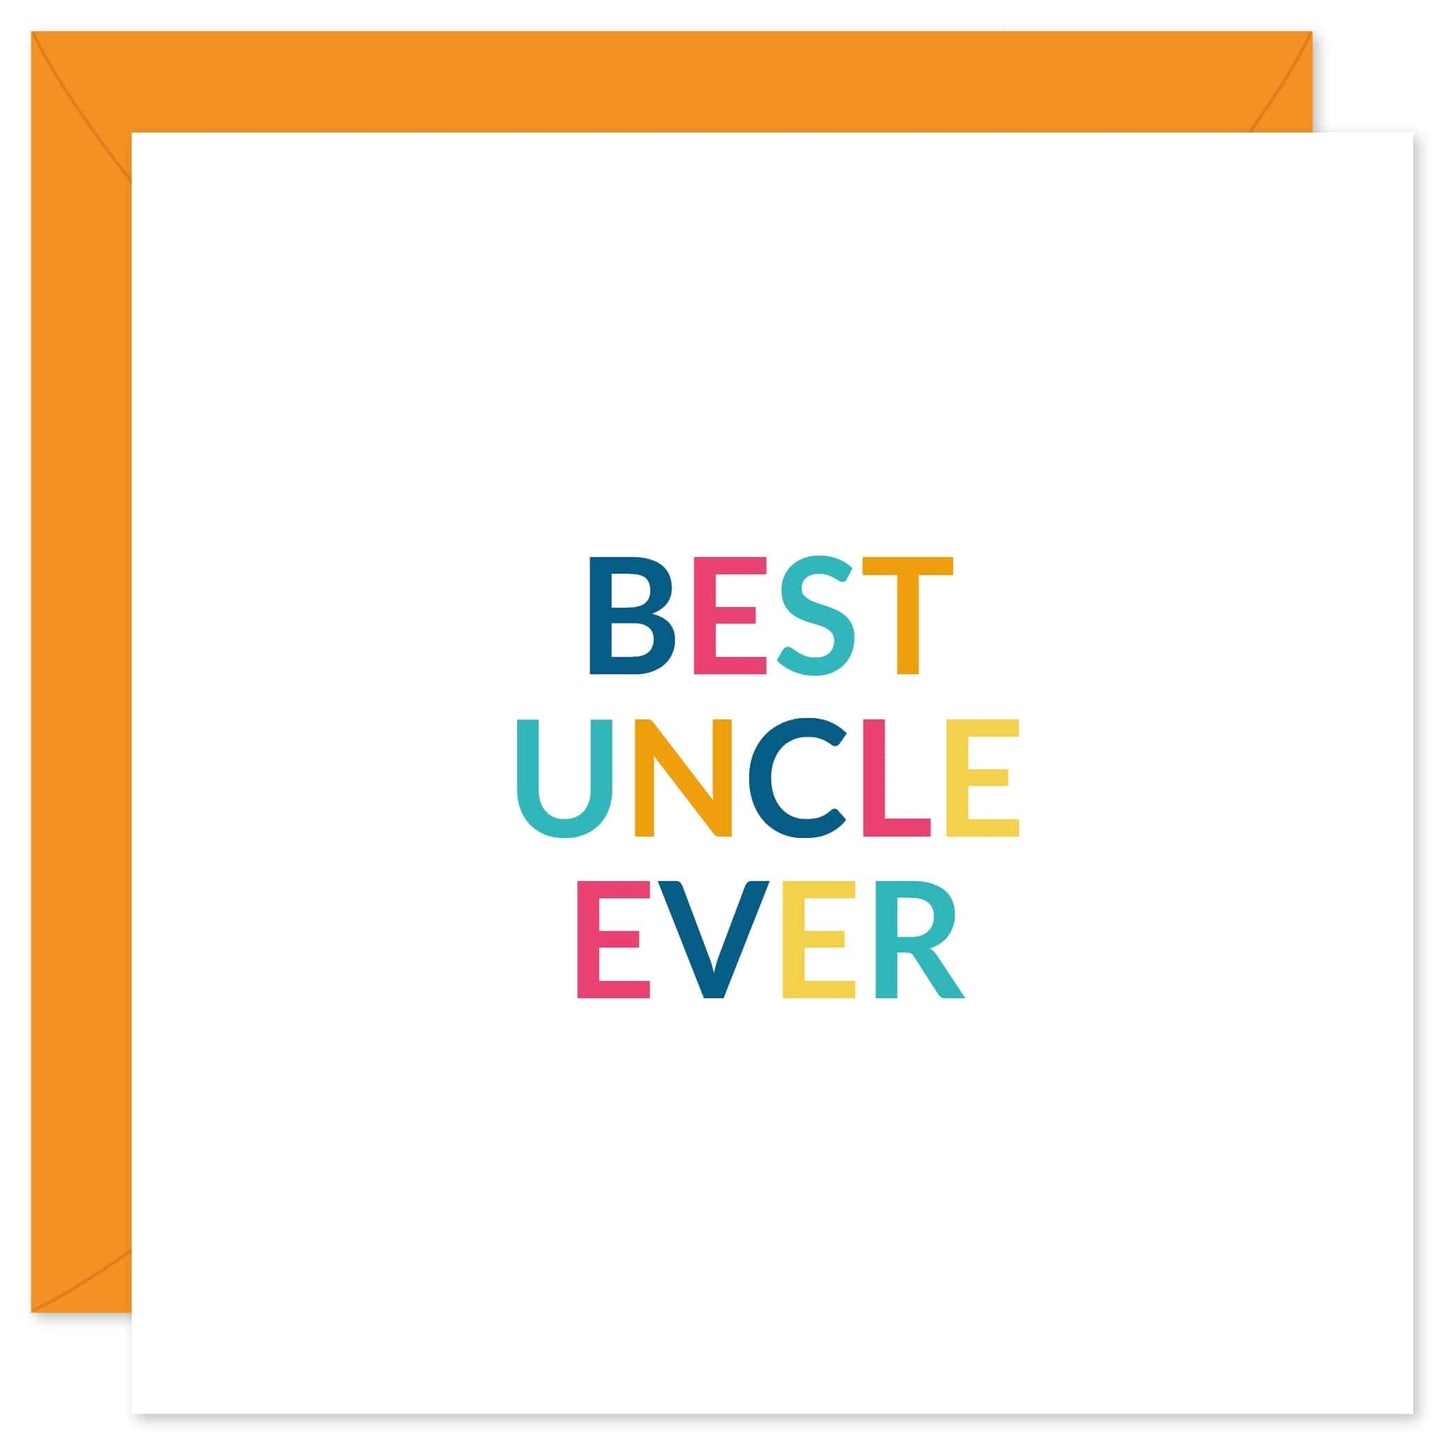 Best uncle ever card